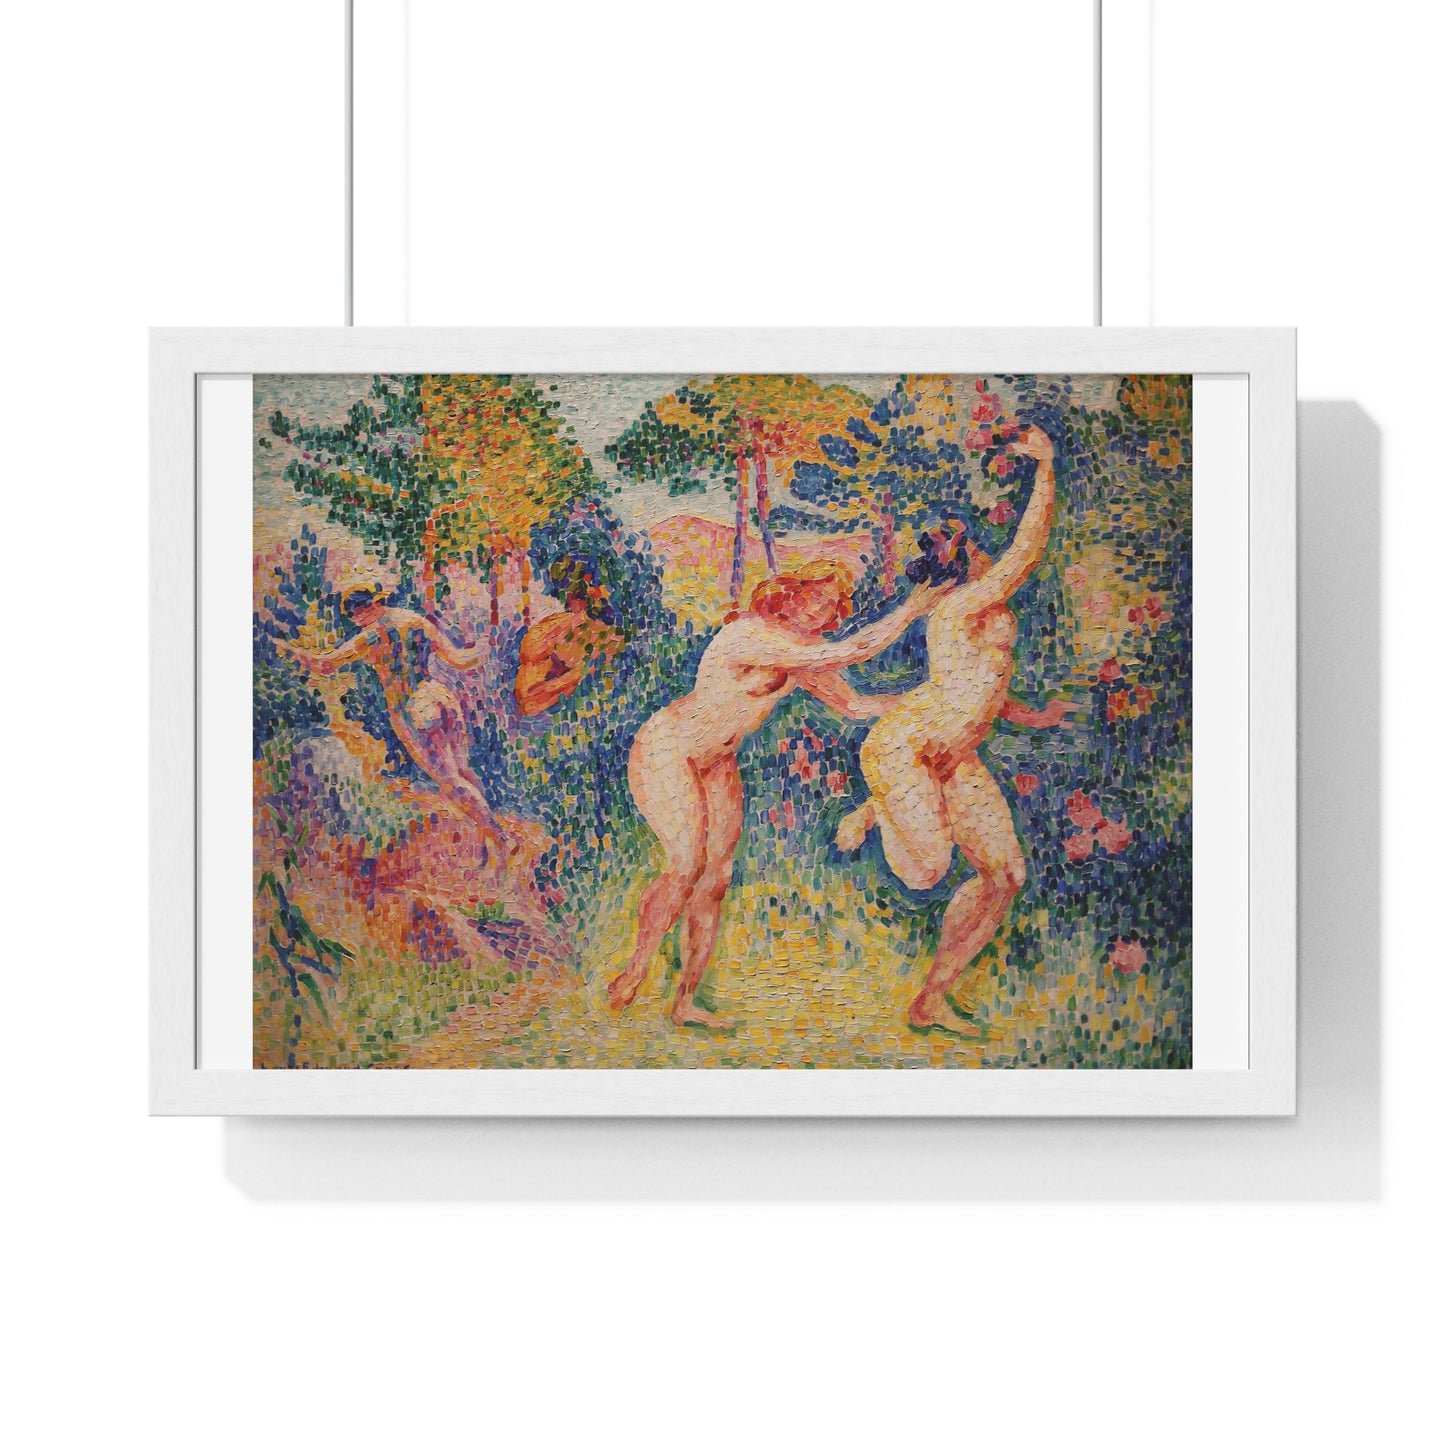 Two Running Nymphs 'La Fuite des Nymphes' (1906) by Henri-Edmond Cross, from the Original, Framed Art Print